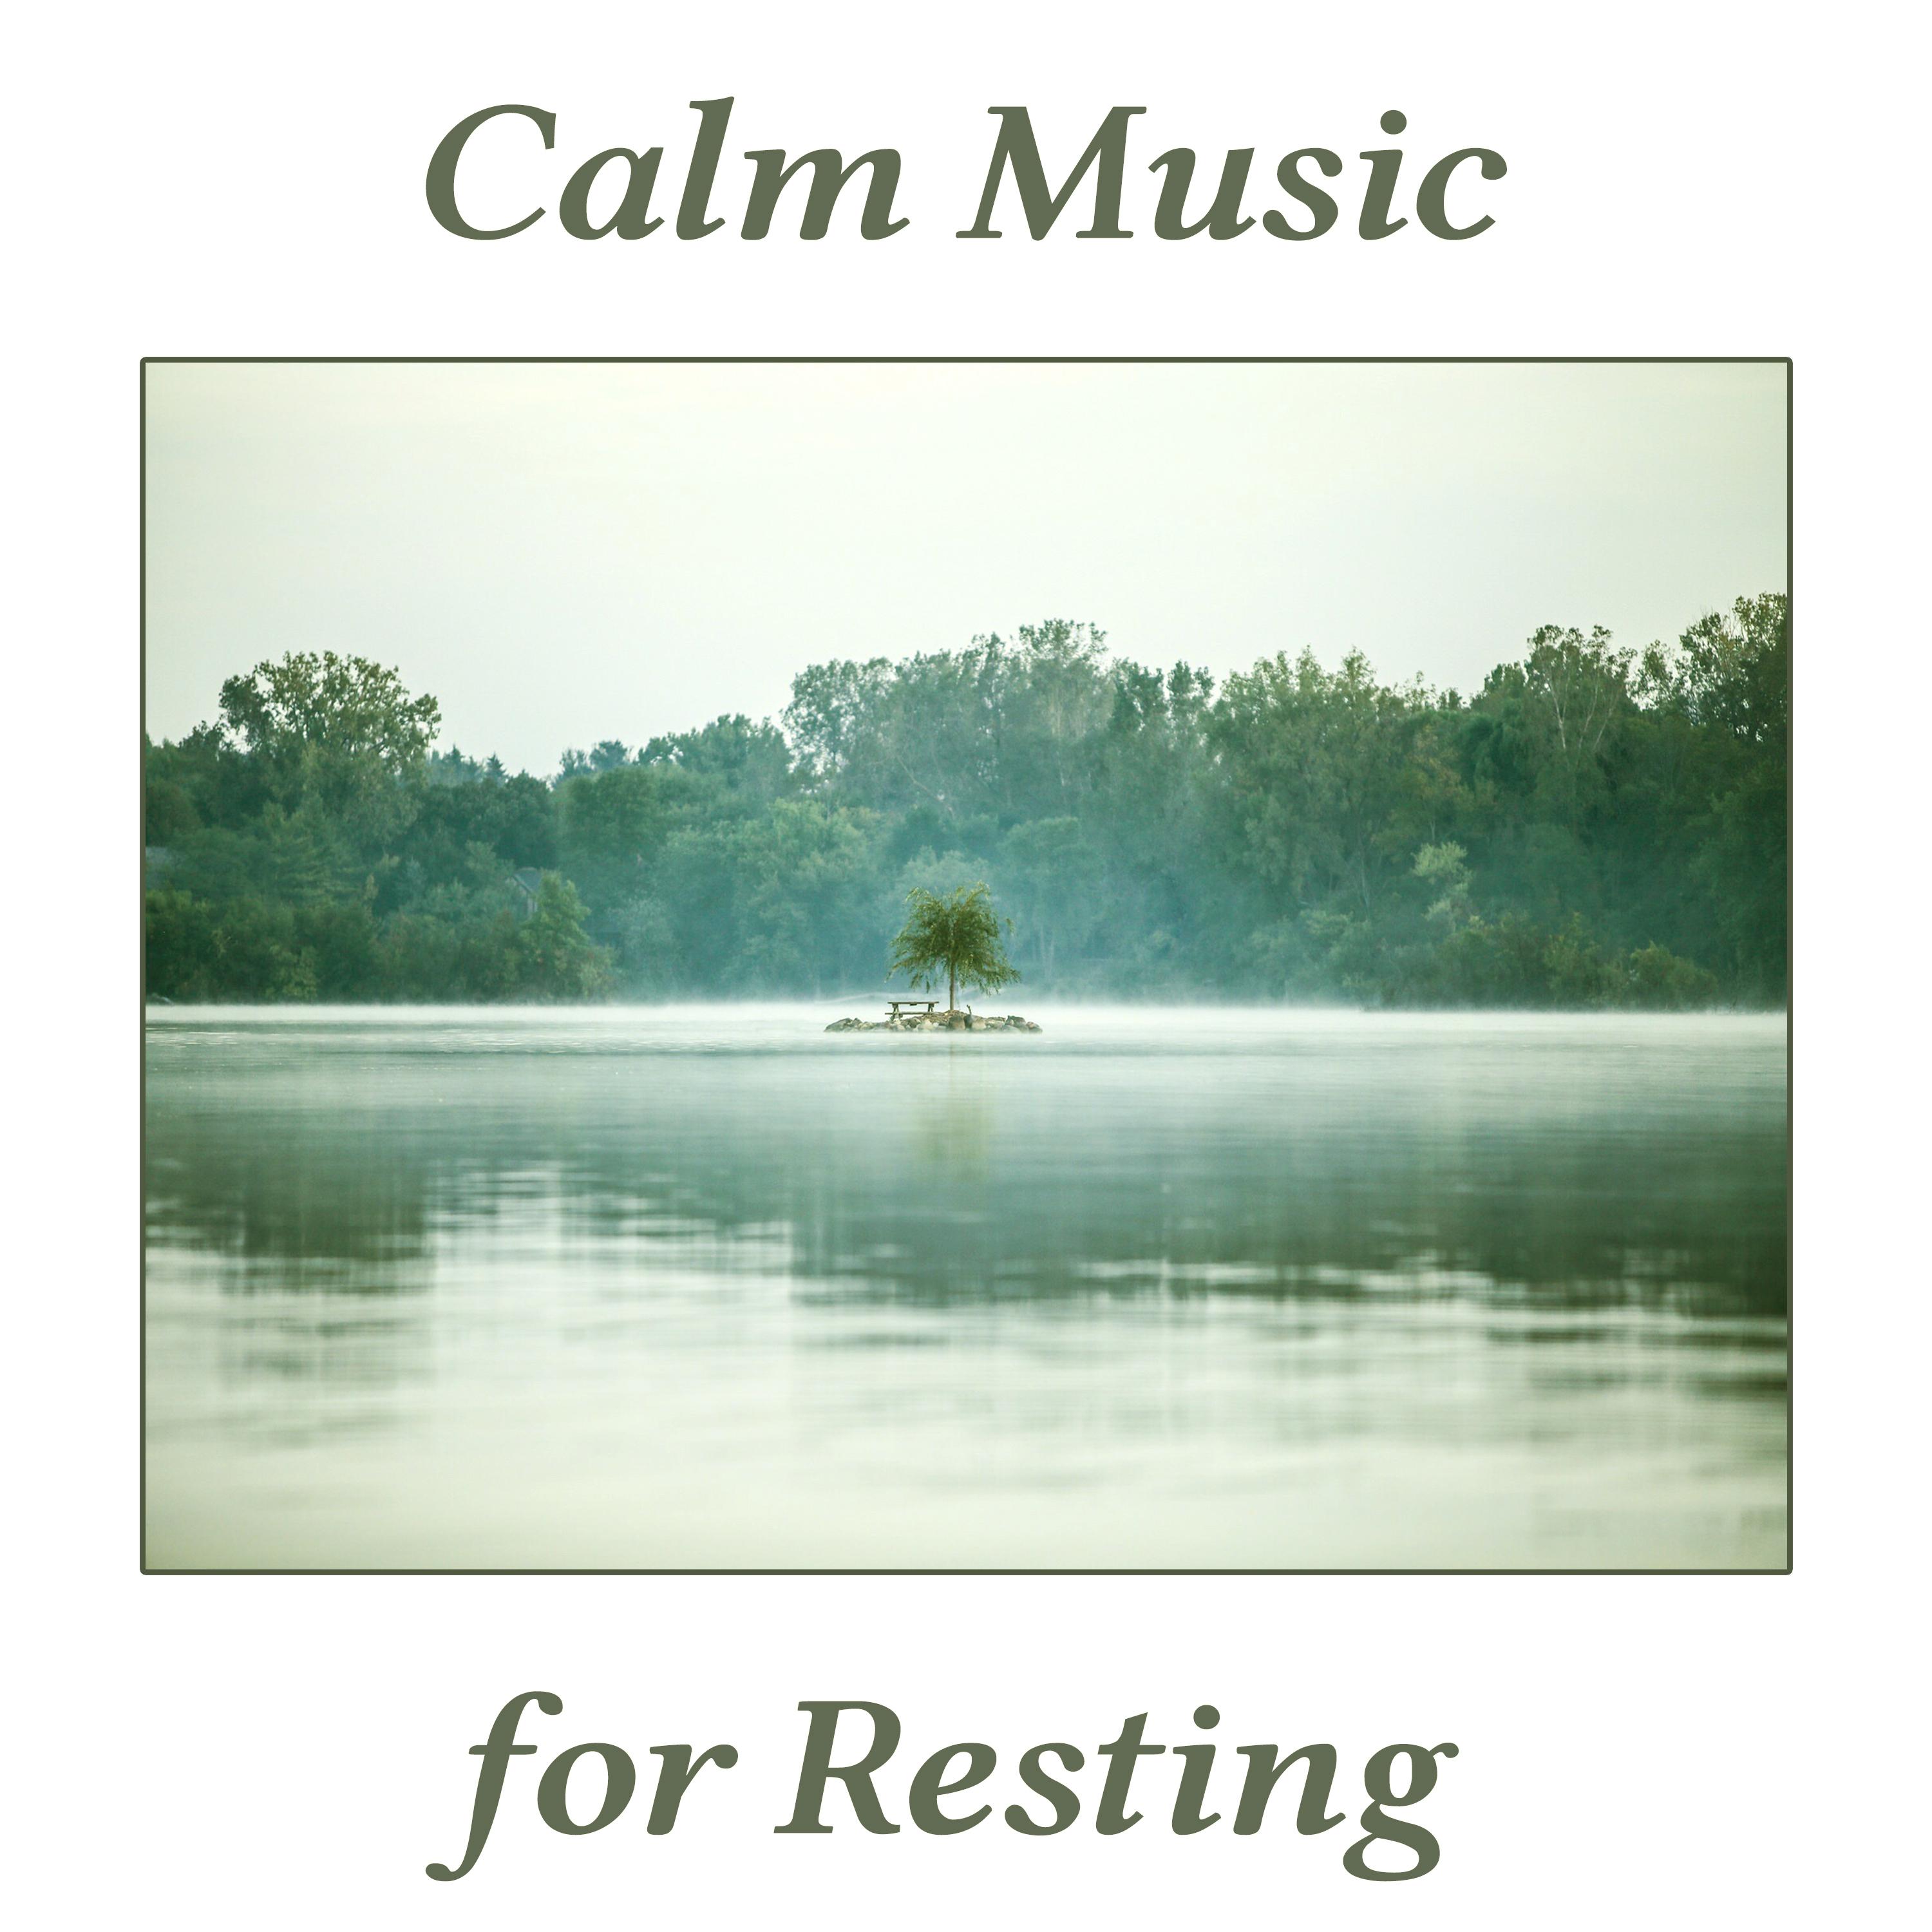 Calm Music for Resting - Recipe for Serenity, Life is Beautiful, Harmony of Piano Music